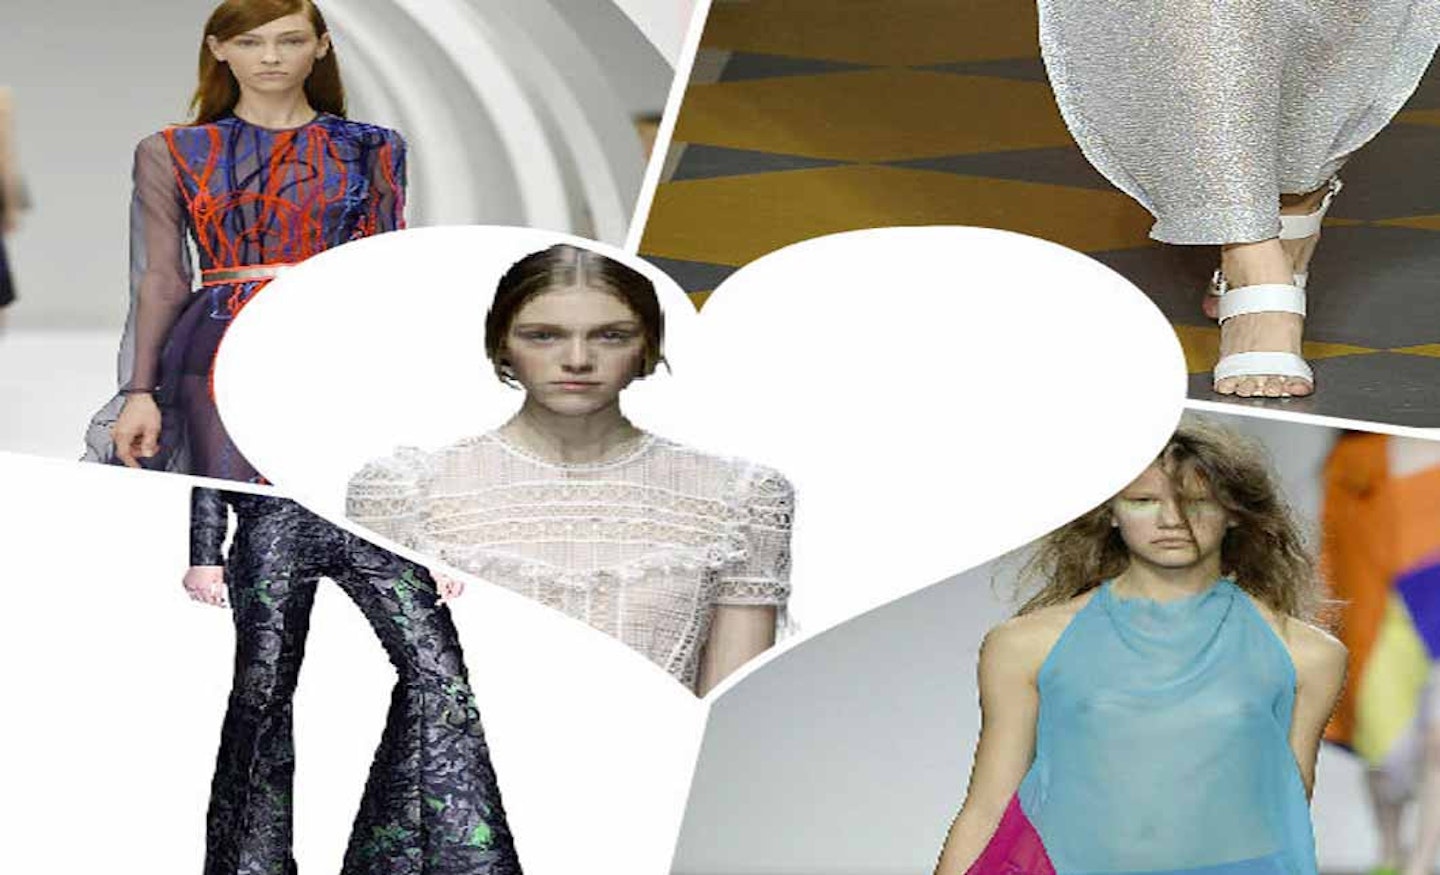 GALLERY >> LFW's 9 Brightest Spring Summer 2015 Trends